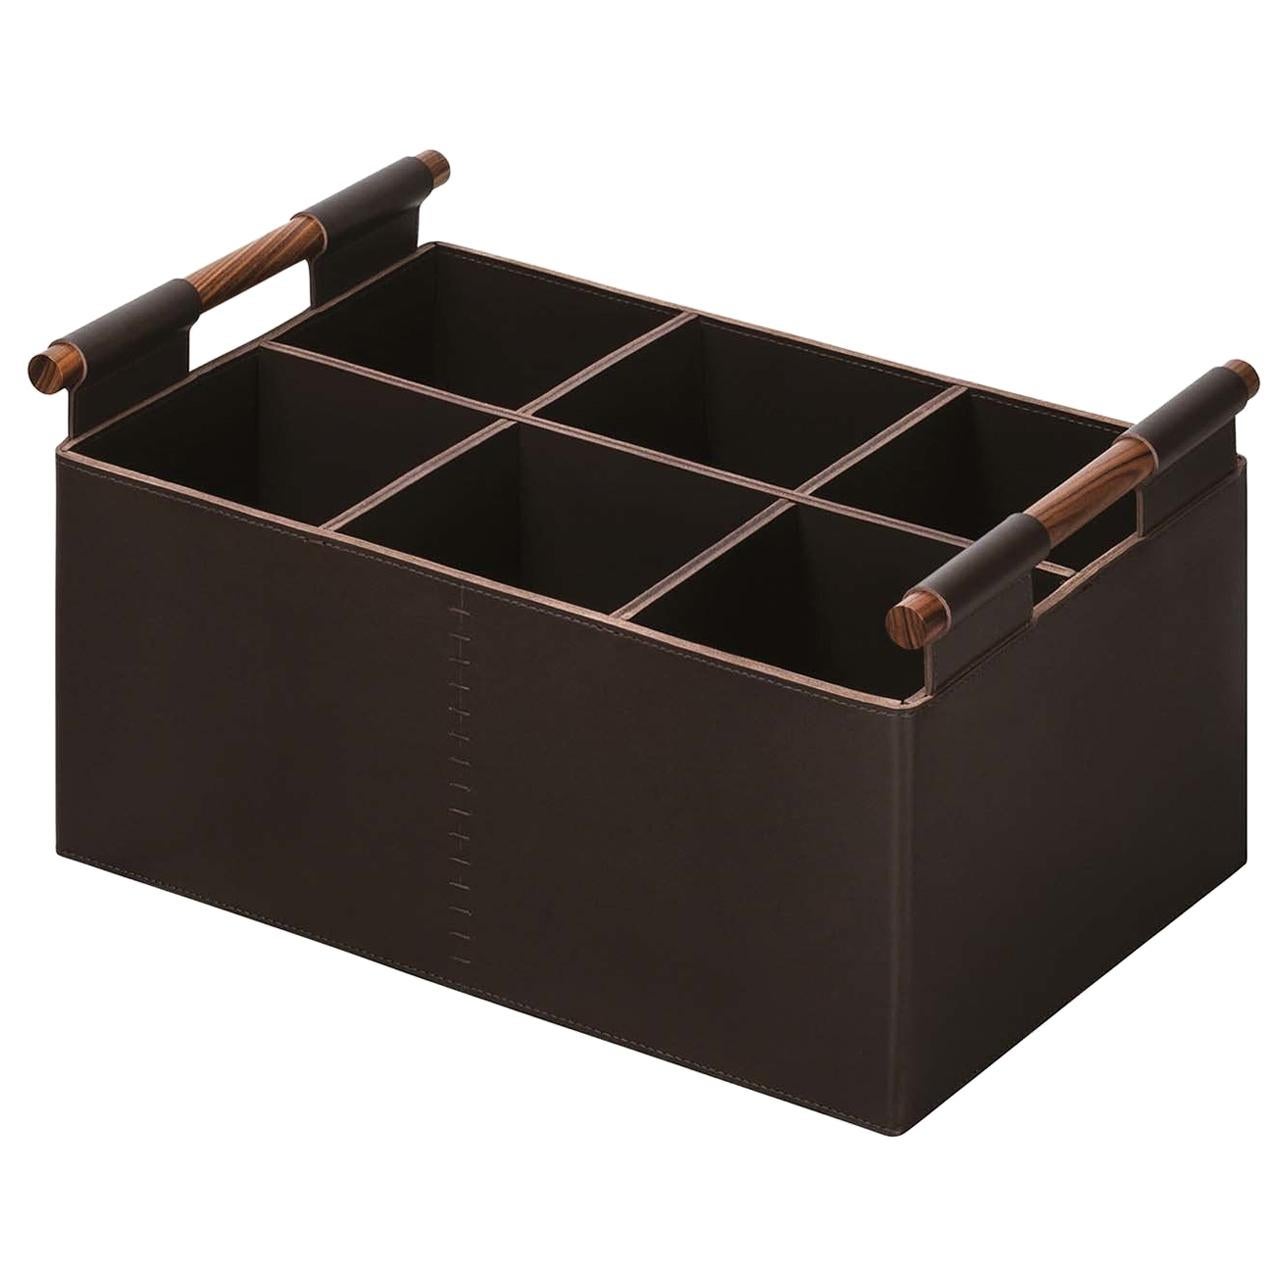 Beta Rectangular Basket with Handles in Brown Leather